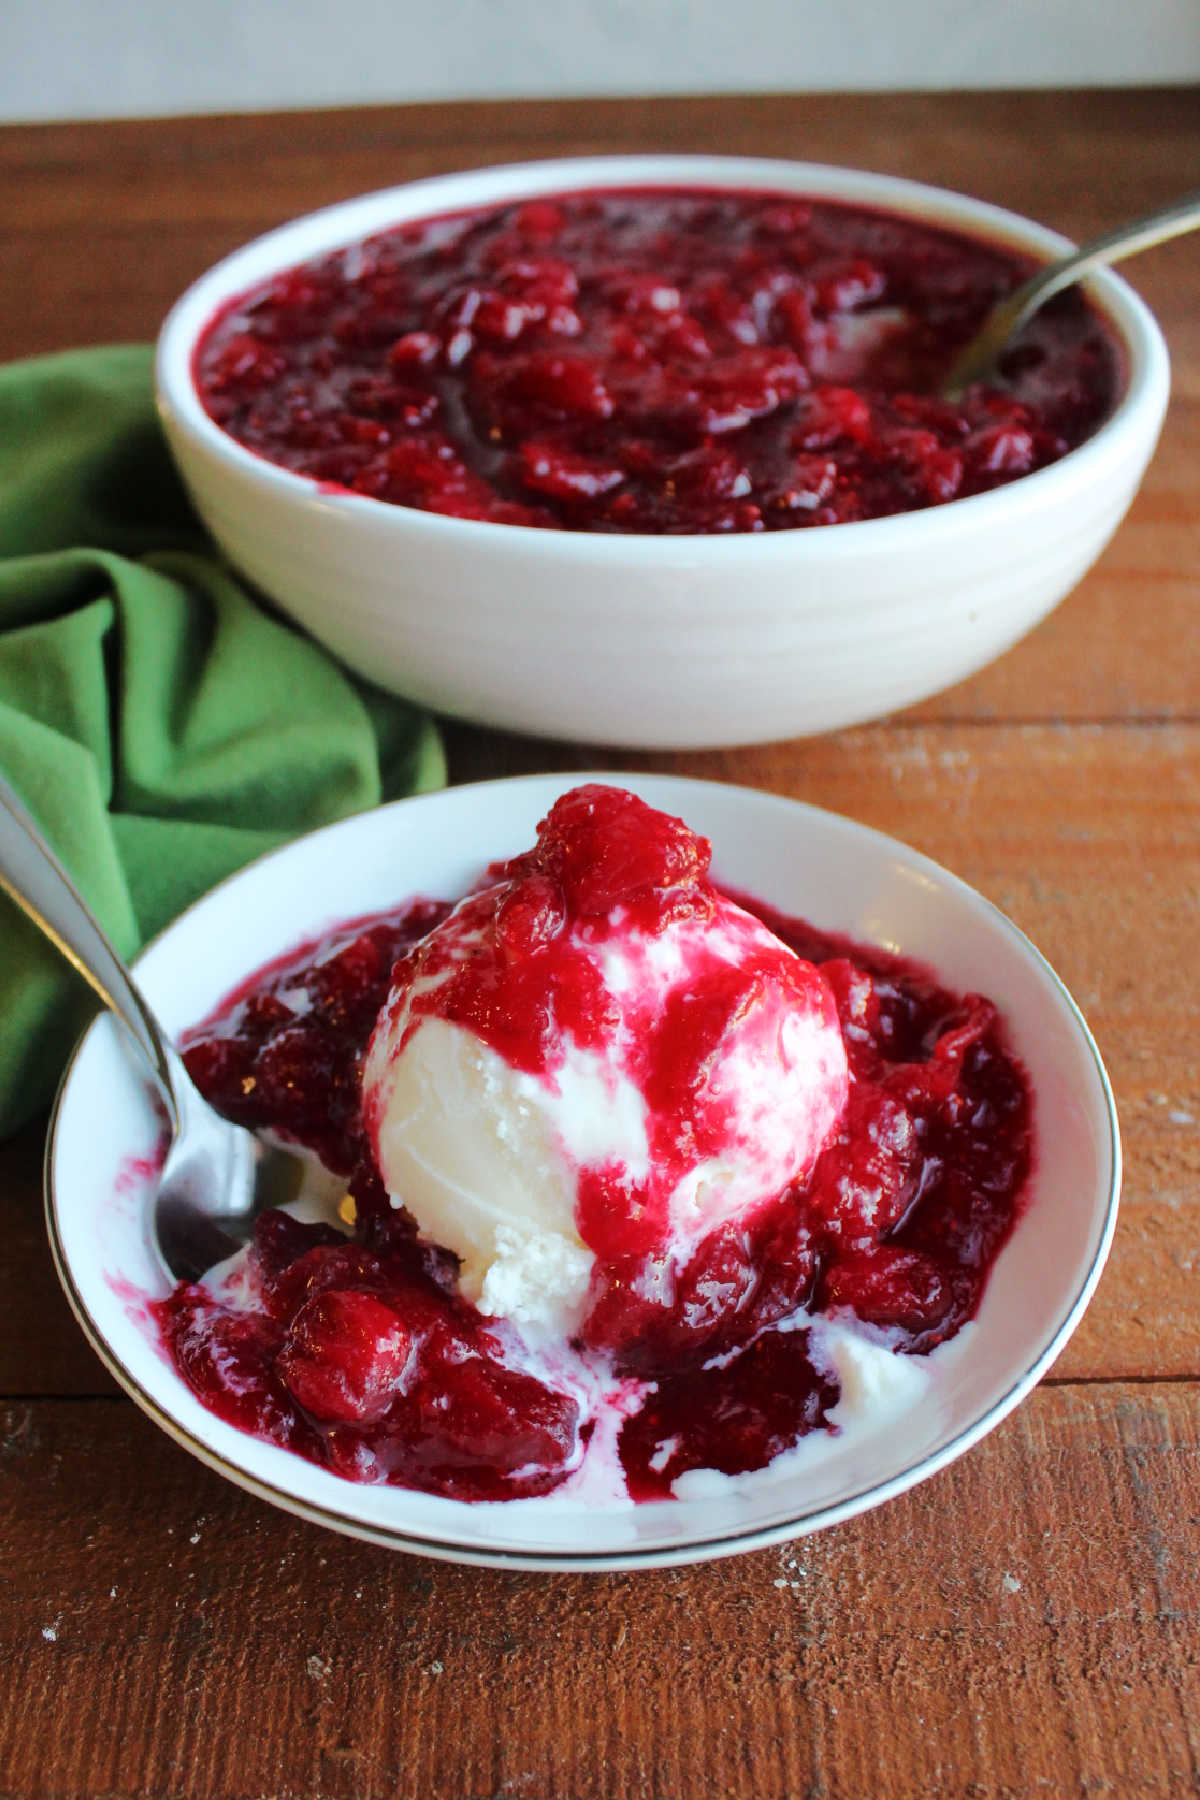 Warm cranberry sauce spooned over scoop of vanilla ice cream in a small bowl.